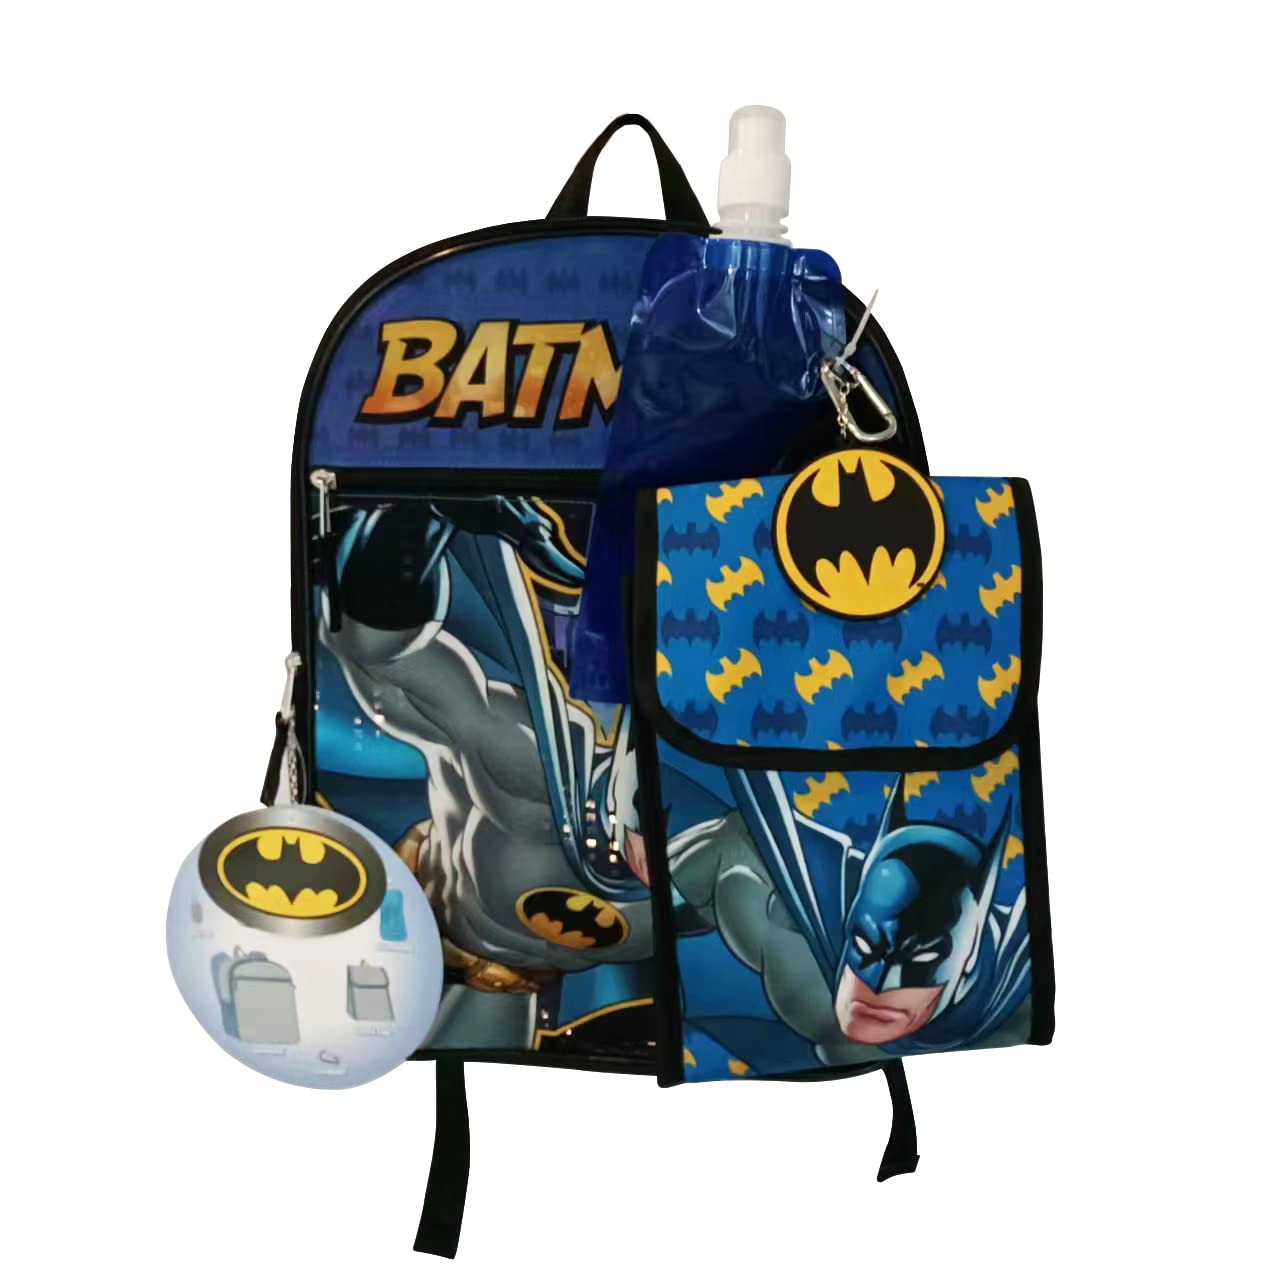 Fast Forward Batman Backpack Set for Kids - All-in-One Superhero Gear: Backpack, Lunch Box, Water Bottle, Keychains - Perfect Bookbag for School Going Boys 4-6